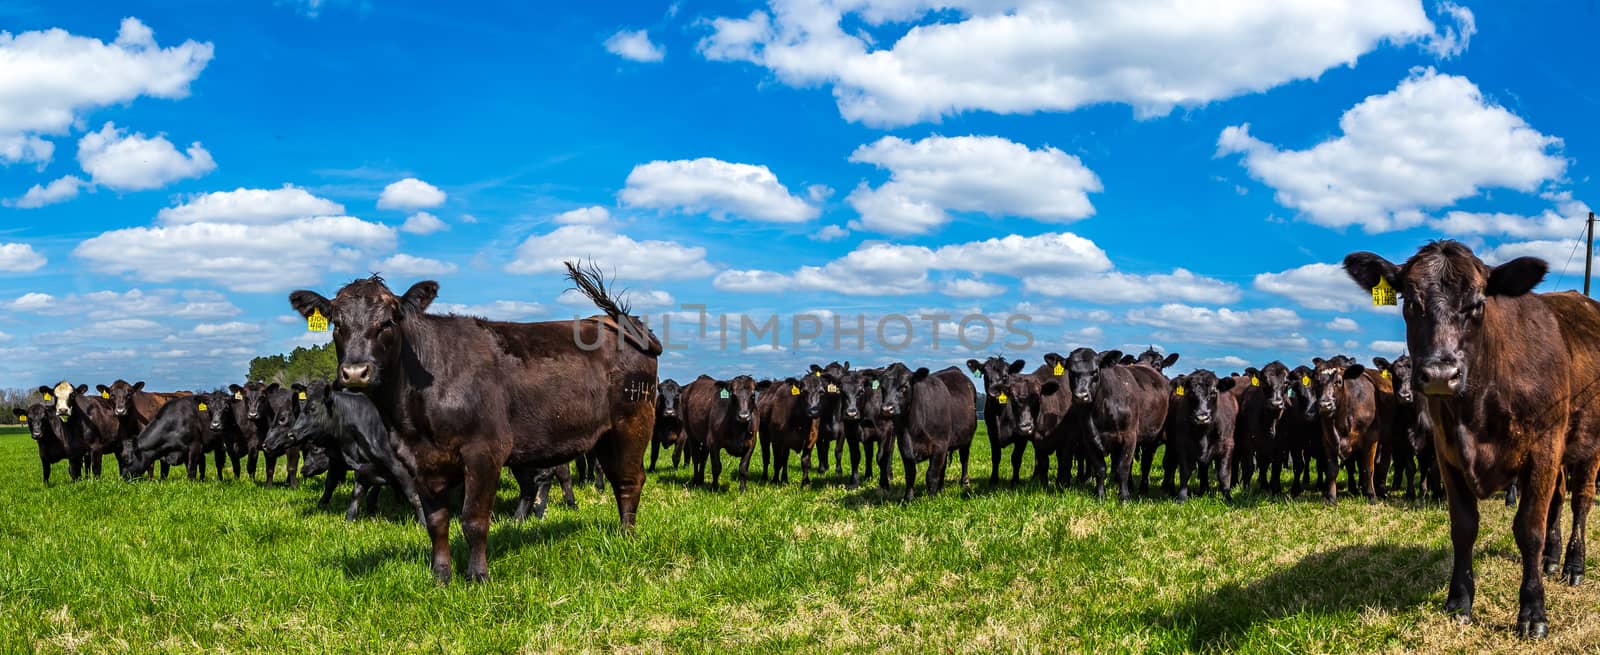 Cattle in a Pasture by adifferentbrian